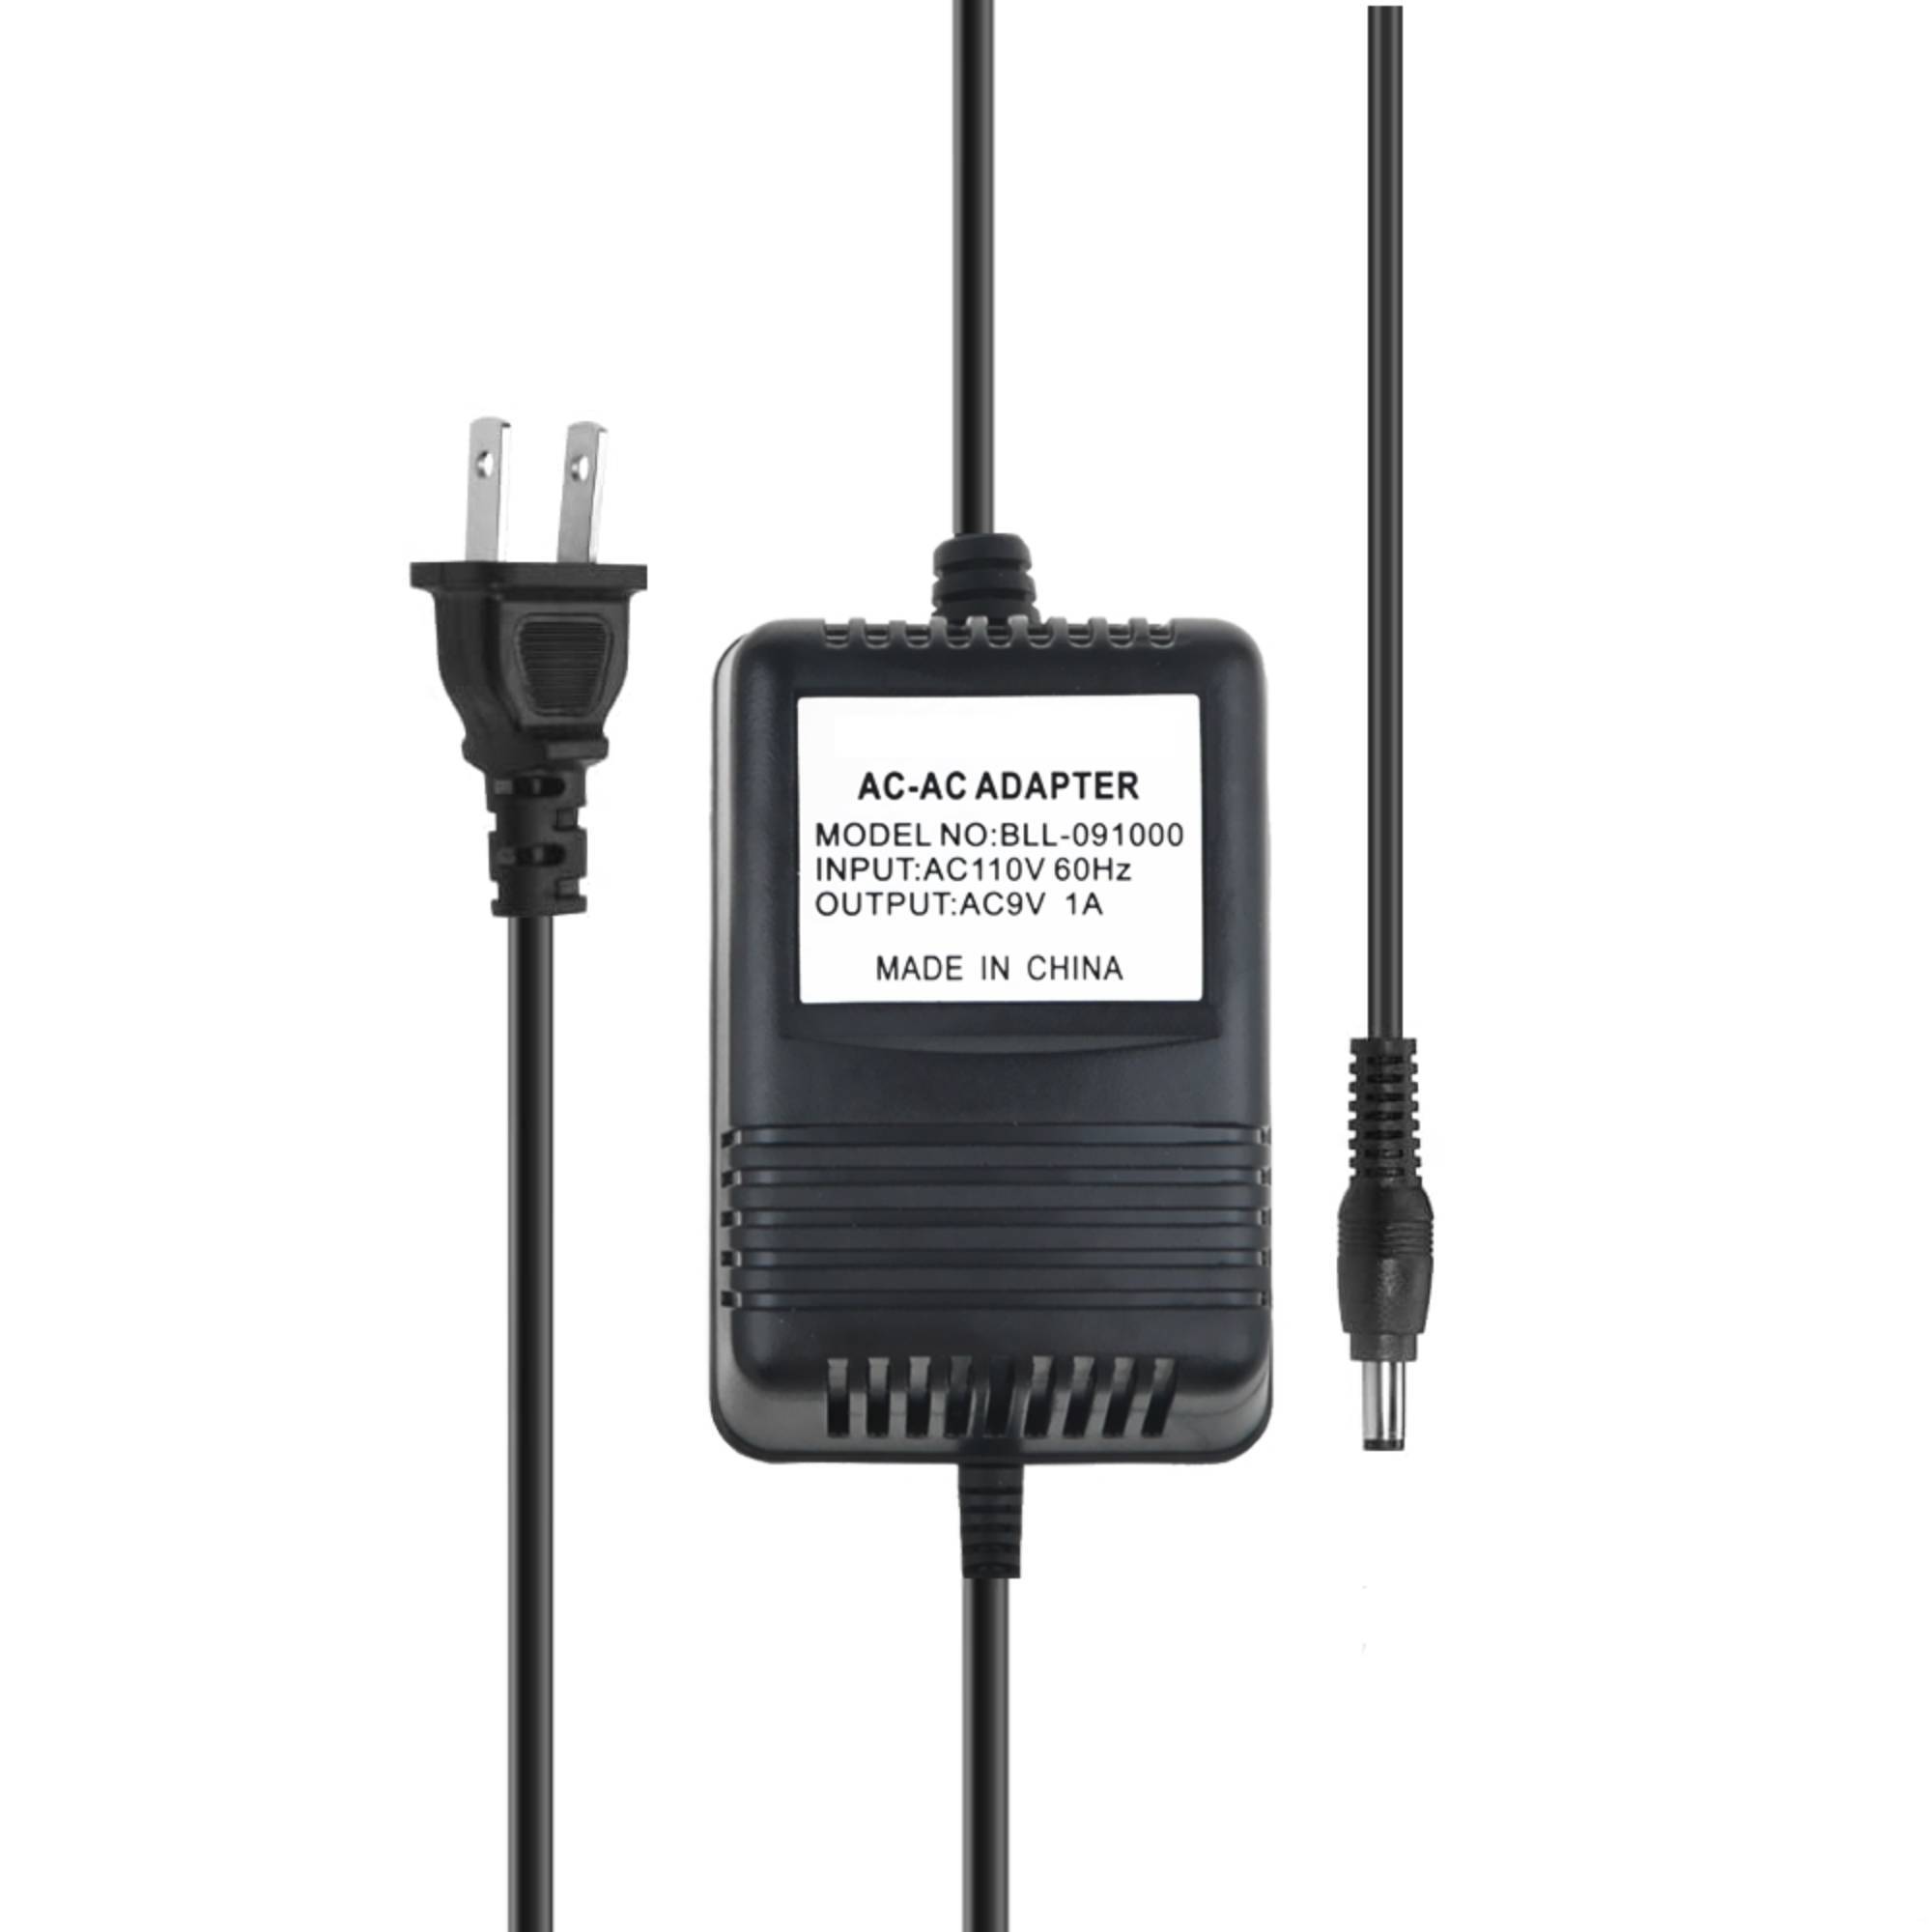 Omilik AC Adapter compatible with Viking Electronics C-2000 C-2000A C-2000B Entry Phone Controller - image 1 of 3